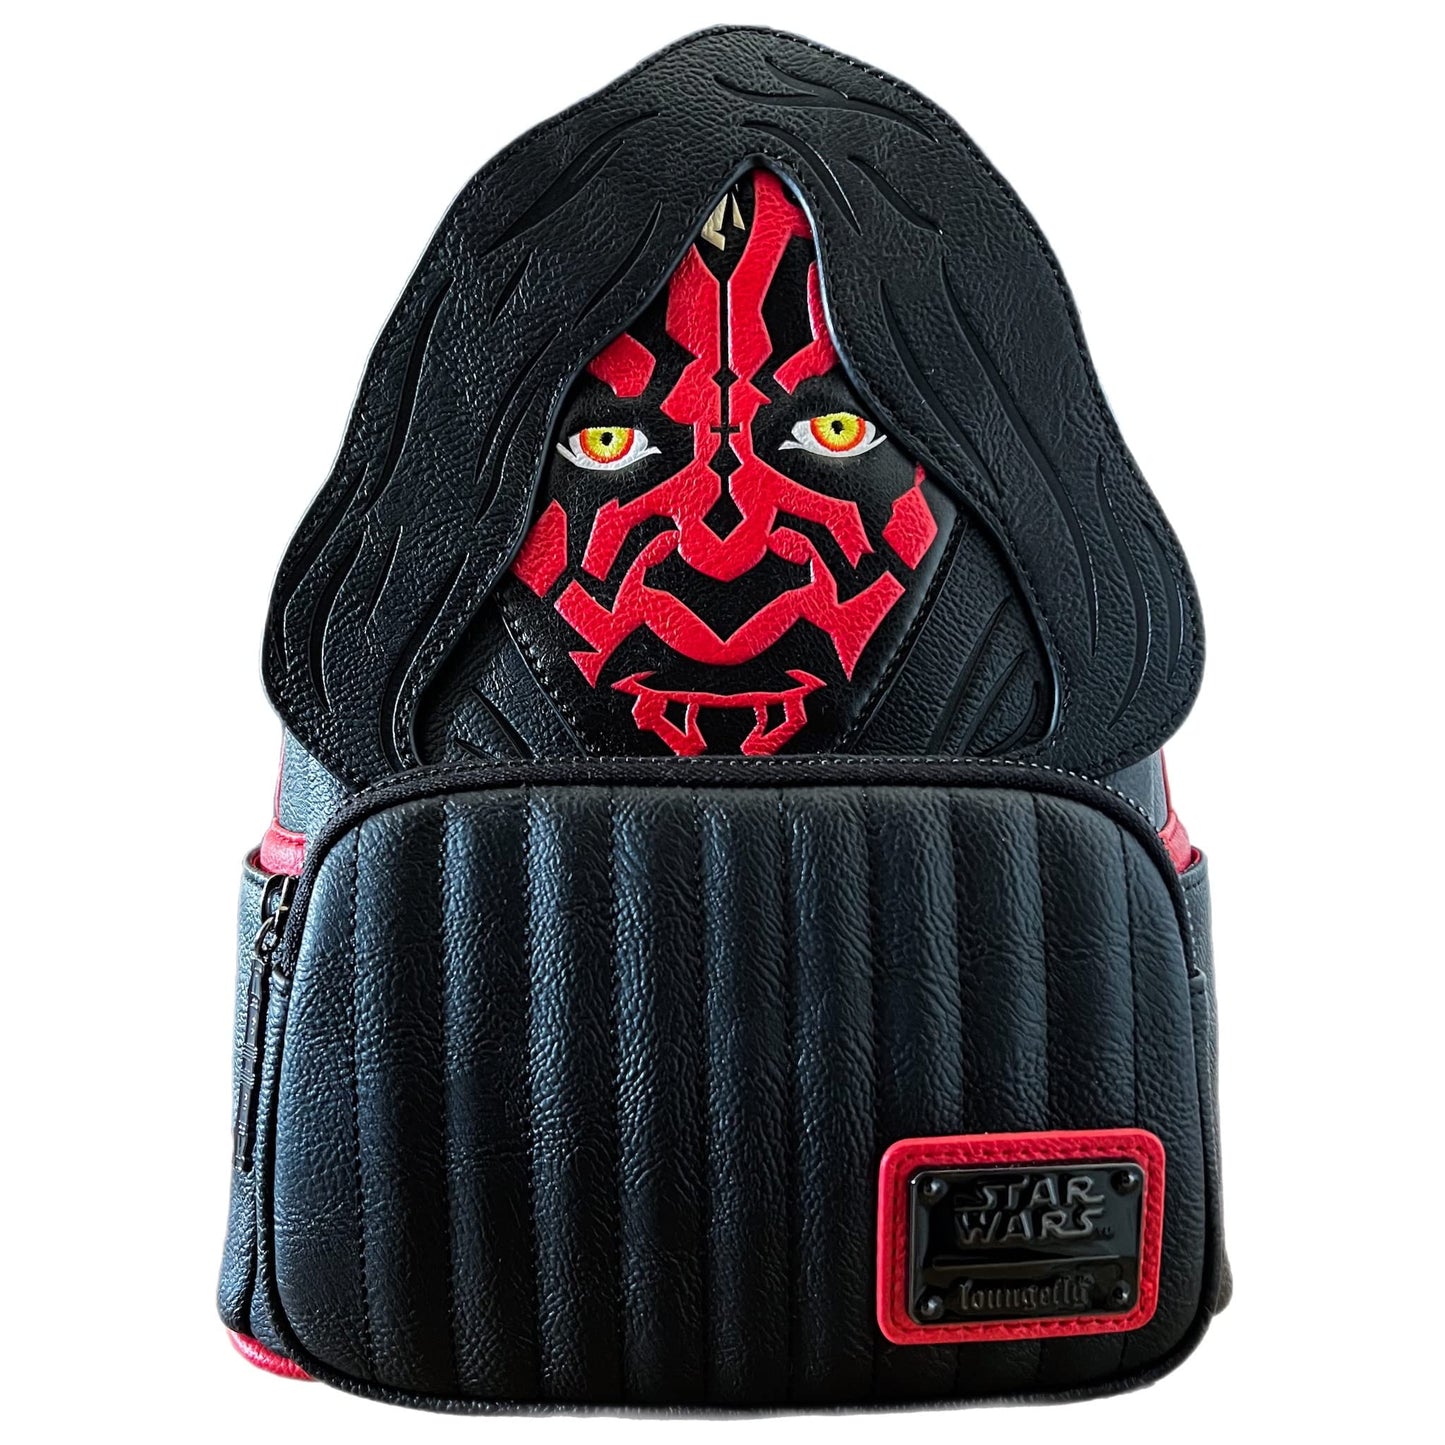 Loungefly Star Wars Darth Maul Cosplay Double Strap Shoulder Bag Purse Mini Backpack